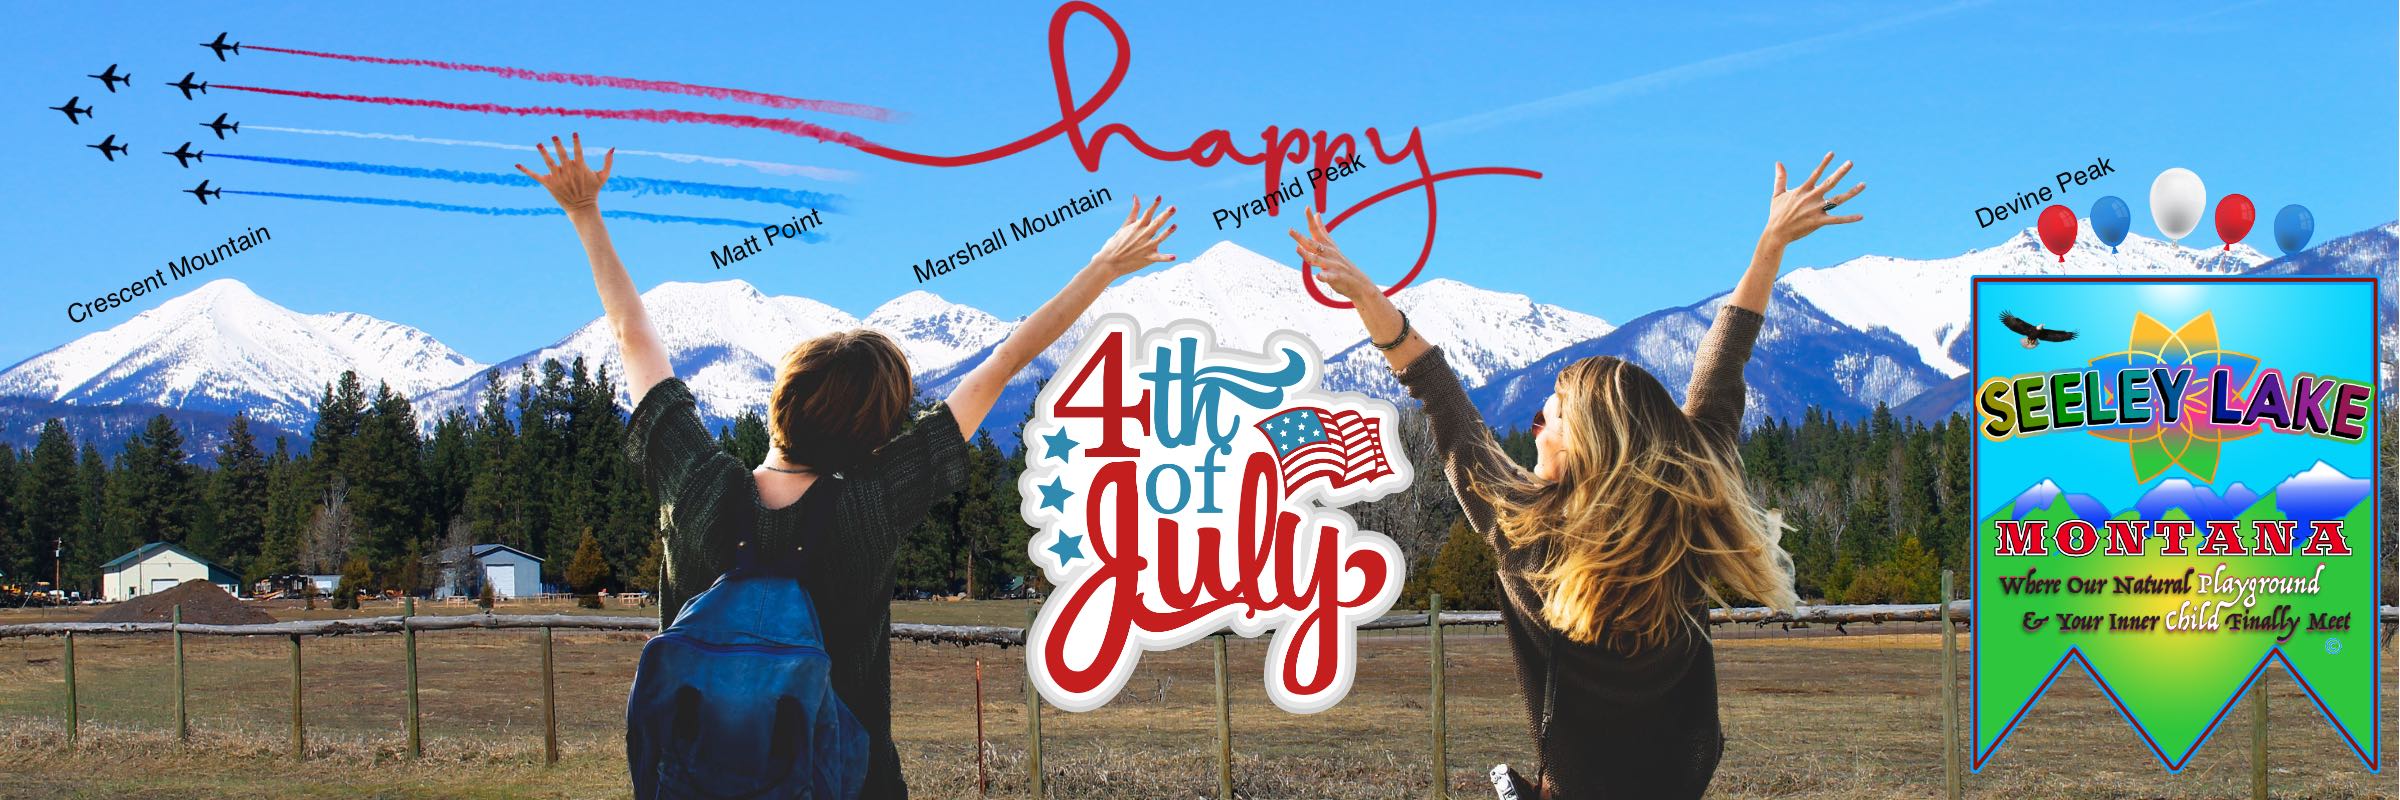 Seeley Lake Montana 2019 4th of July Parade | Happy 4th of July 2019